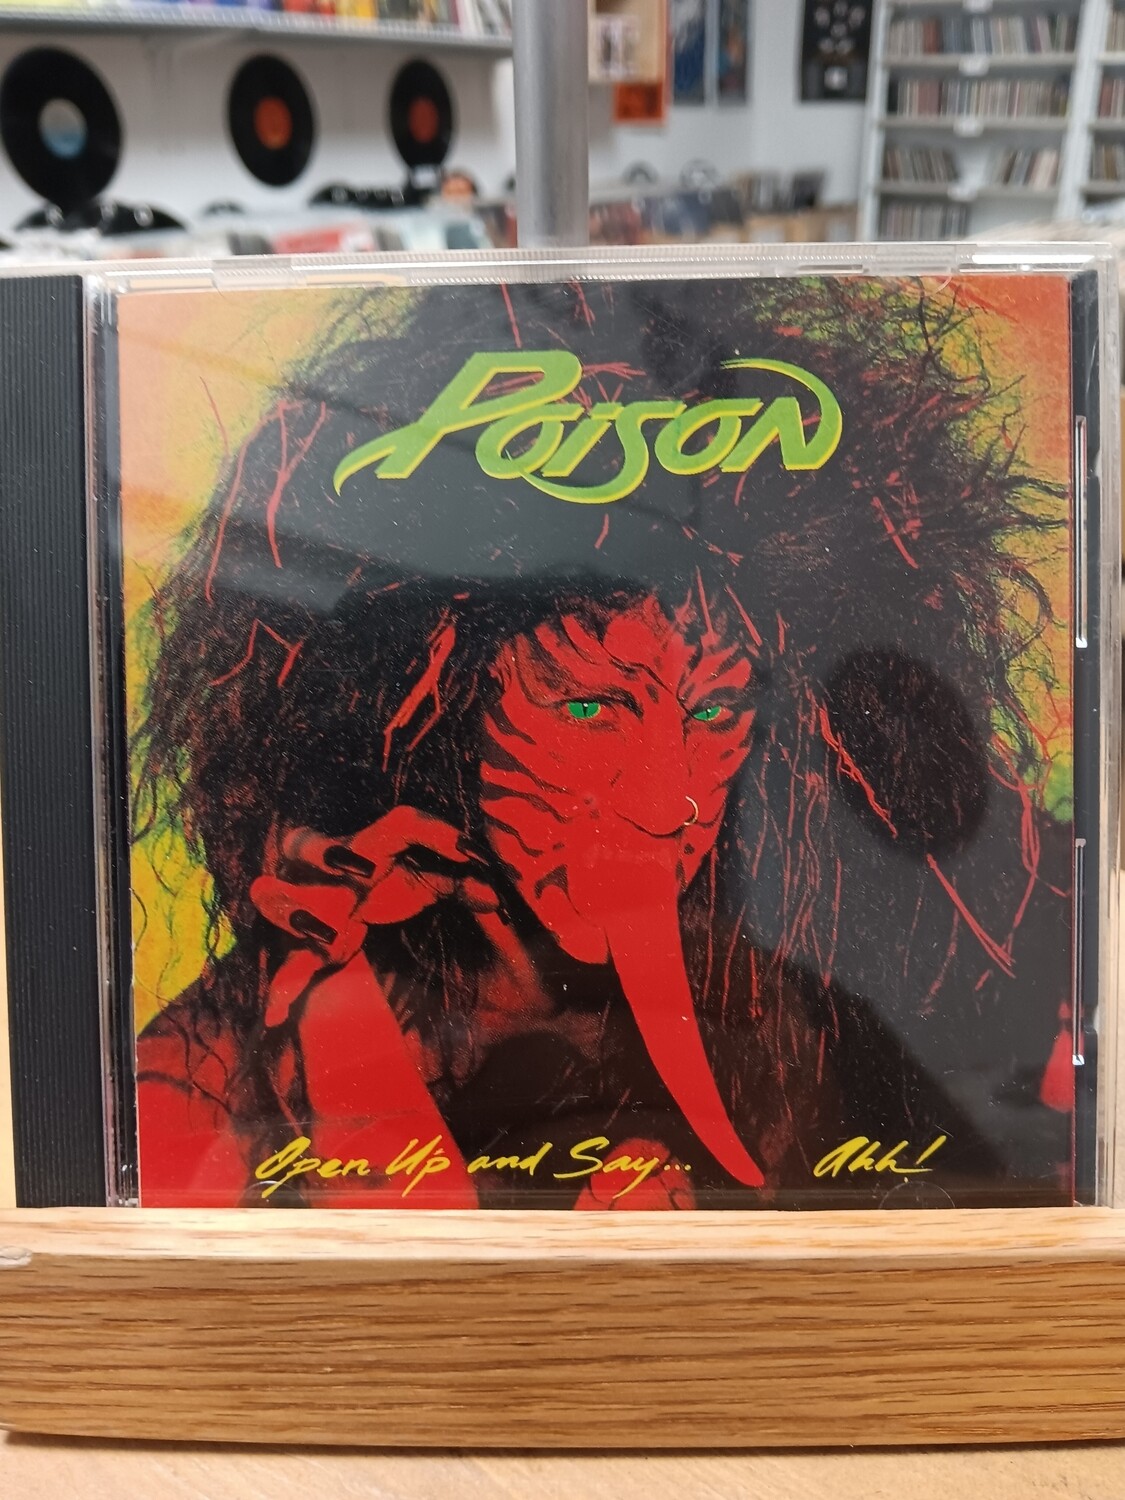 POISON - Open up and say ahh (CD)